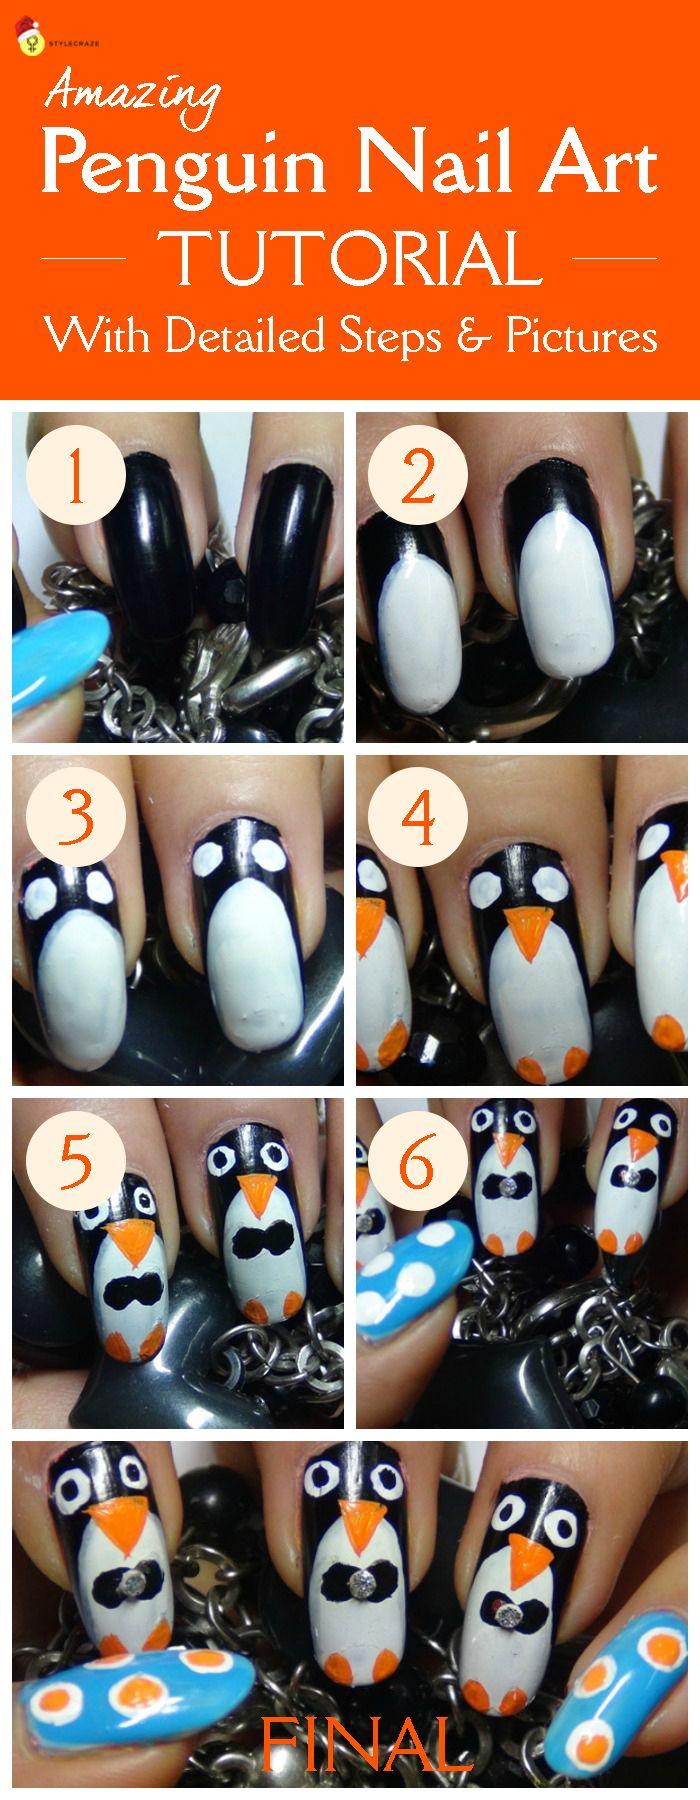 Hochzeit - Amazing Penguin Nail Art Tutorial With Detailed Steps & Pictures